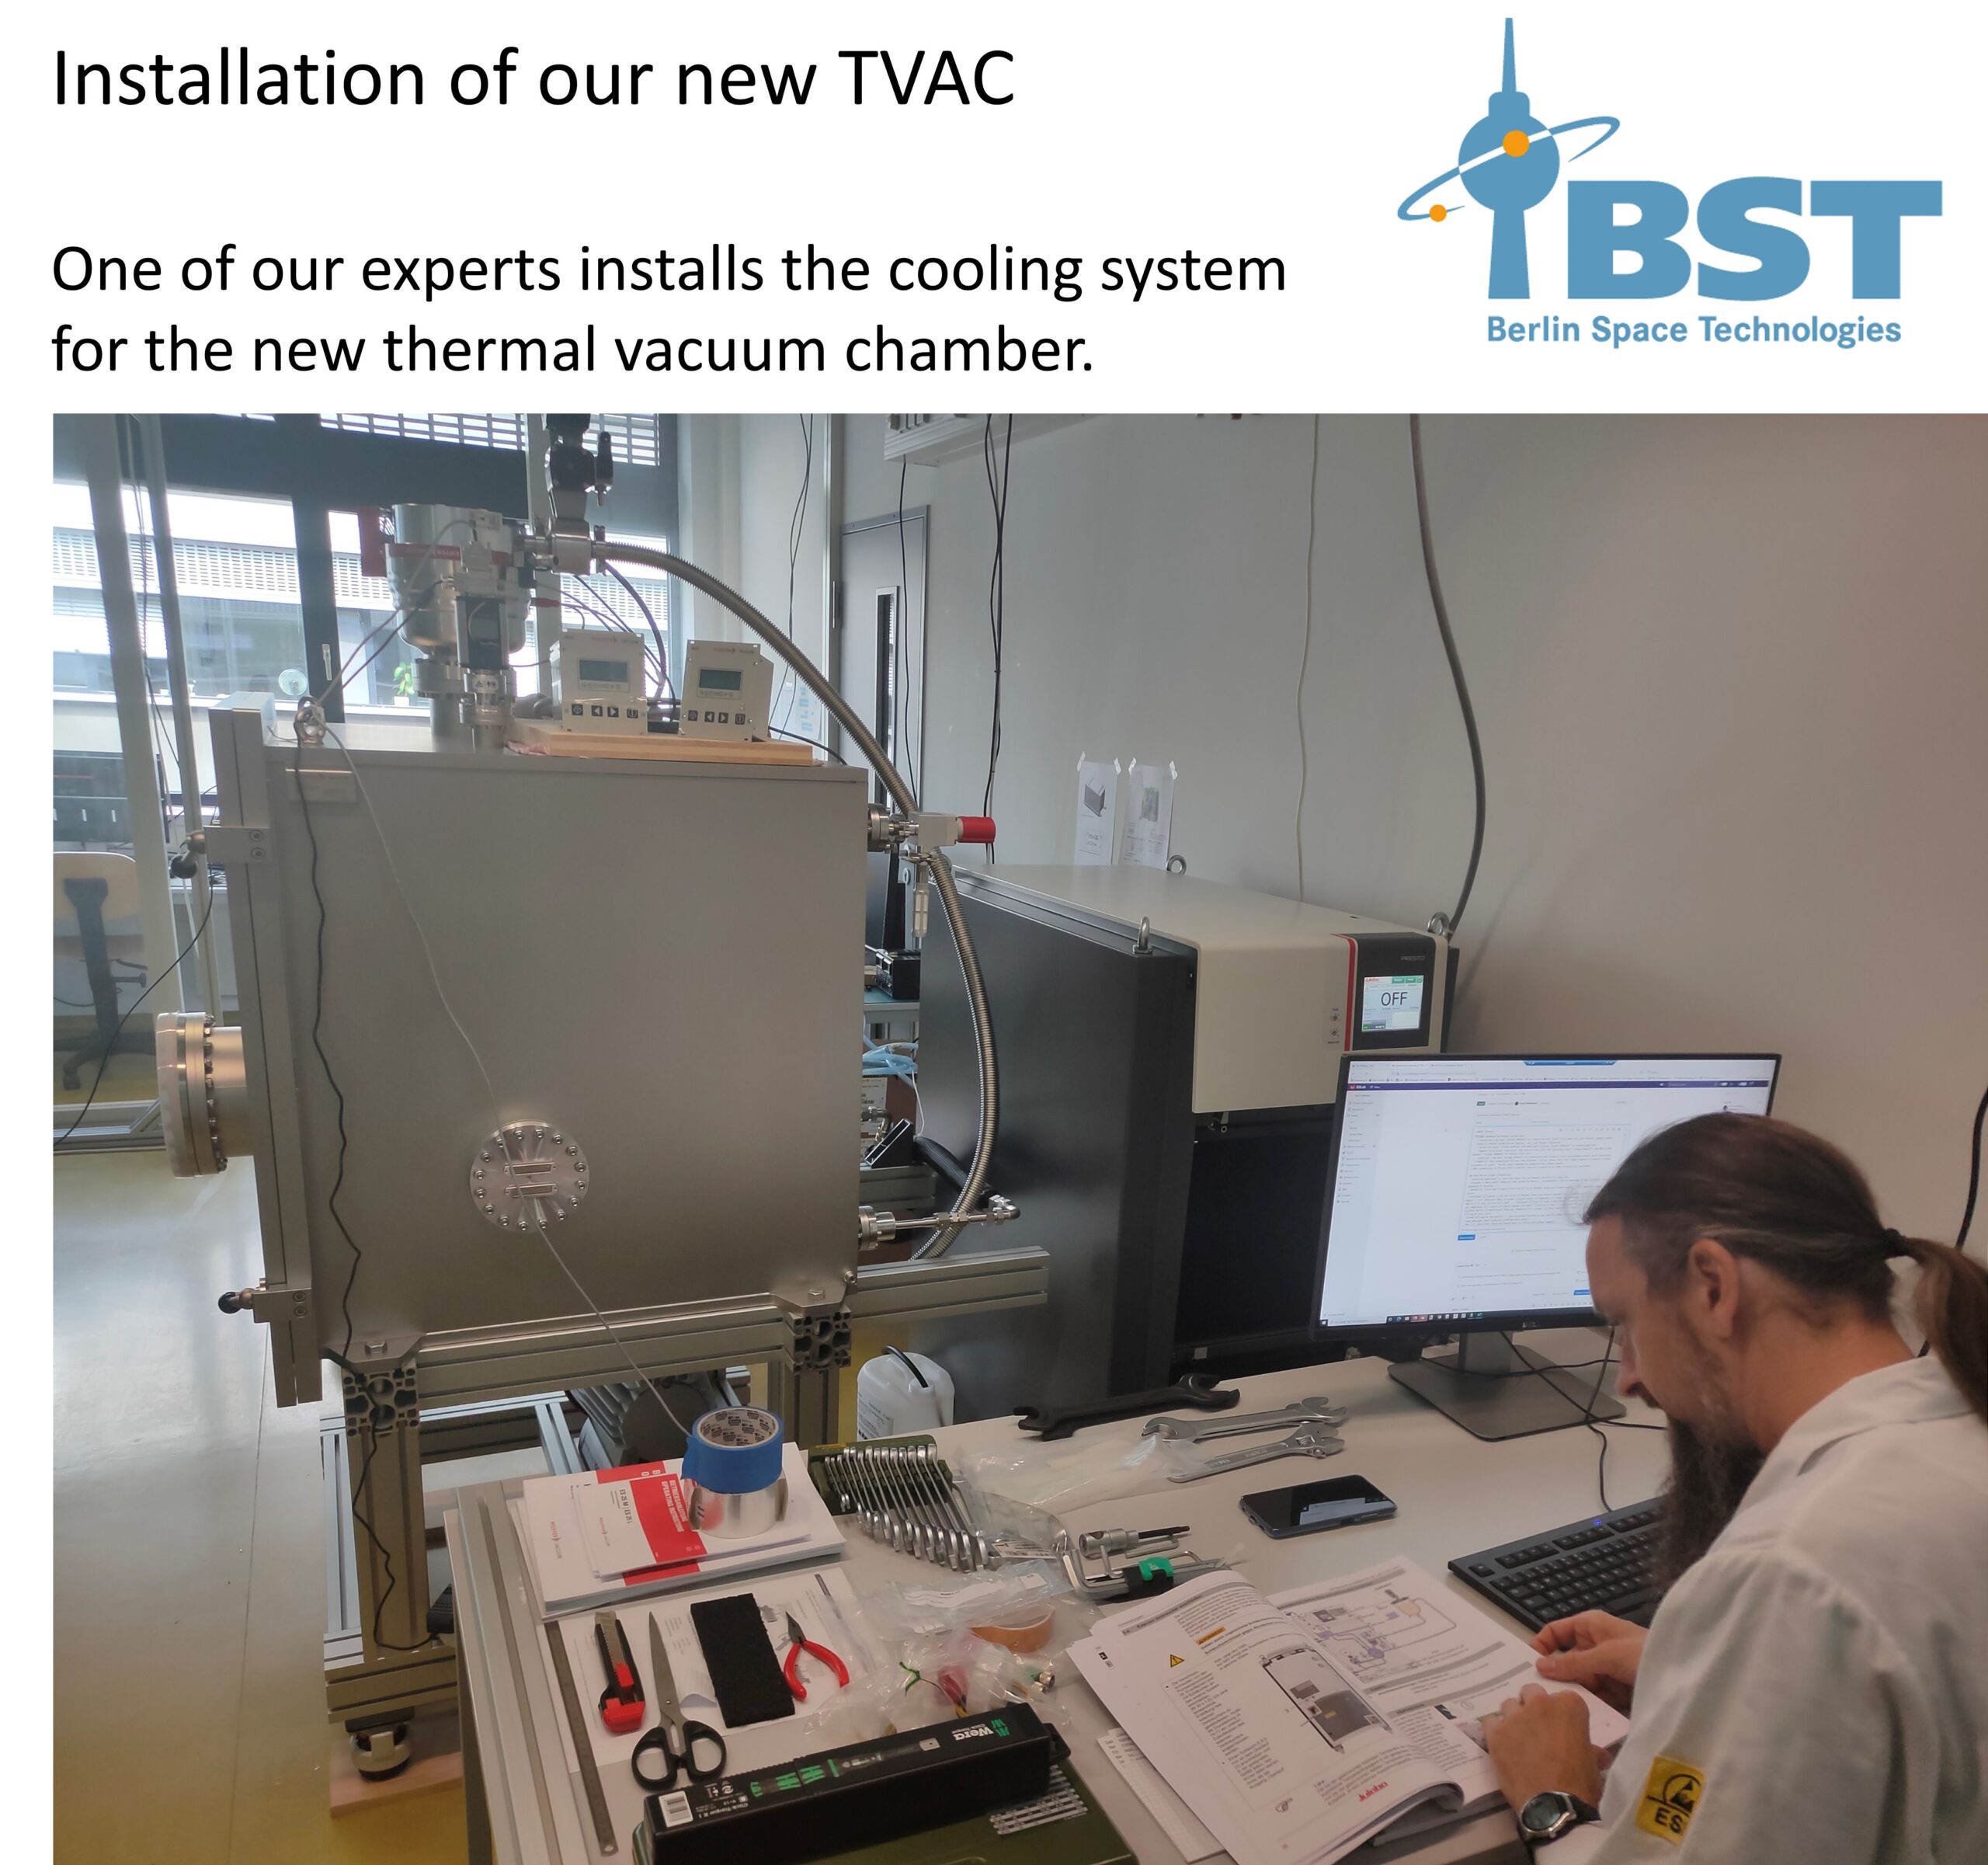 Our New TVAC